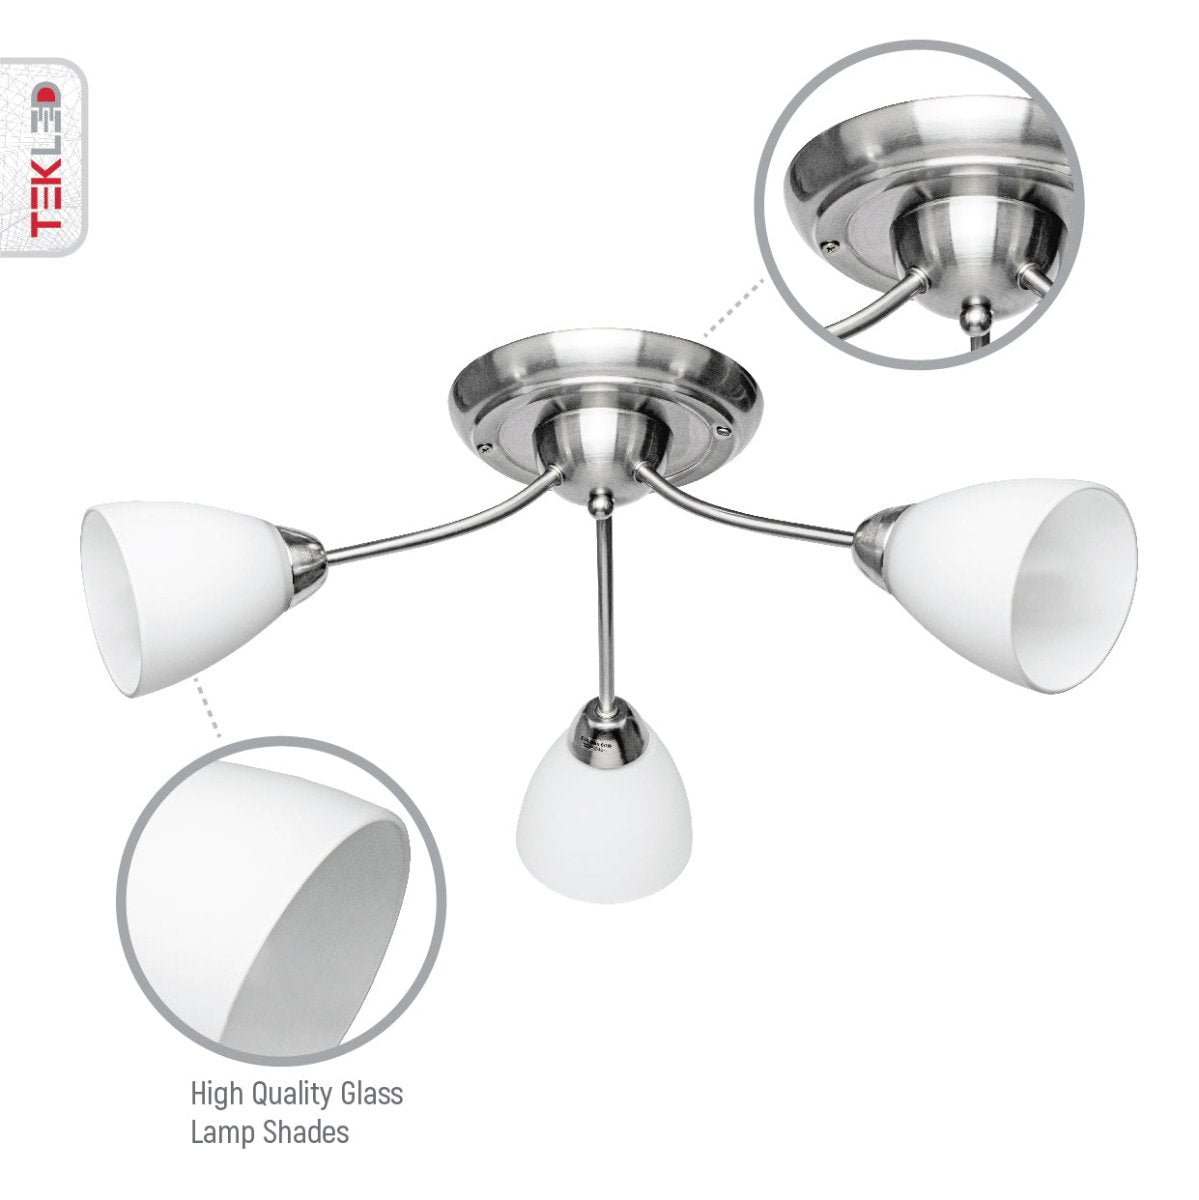 Features of white glass chrome semi-flush ceiling light with 3xE27 fitting